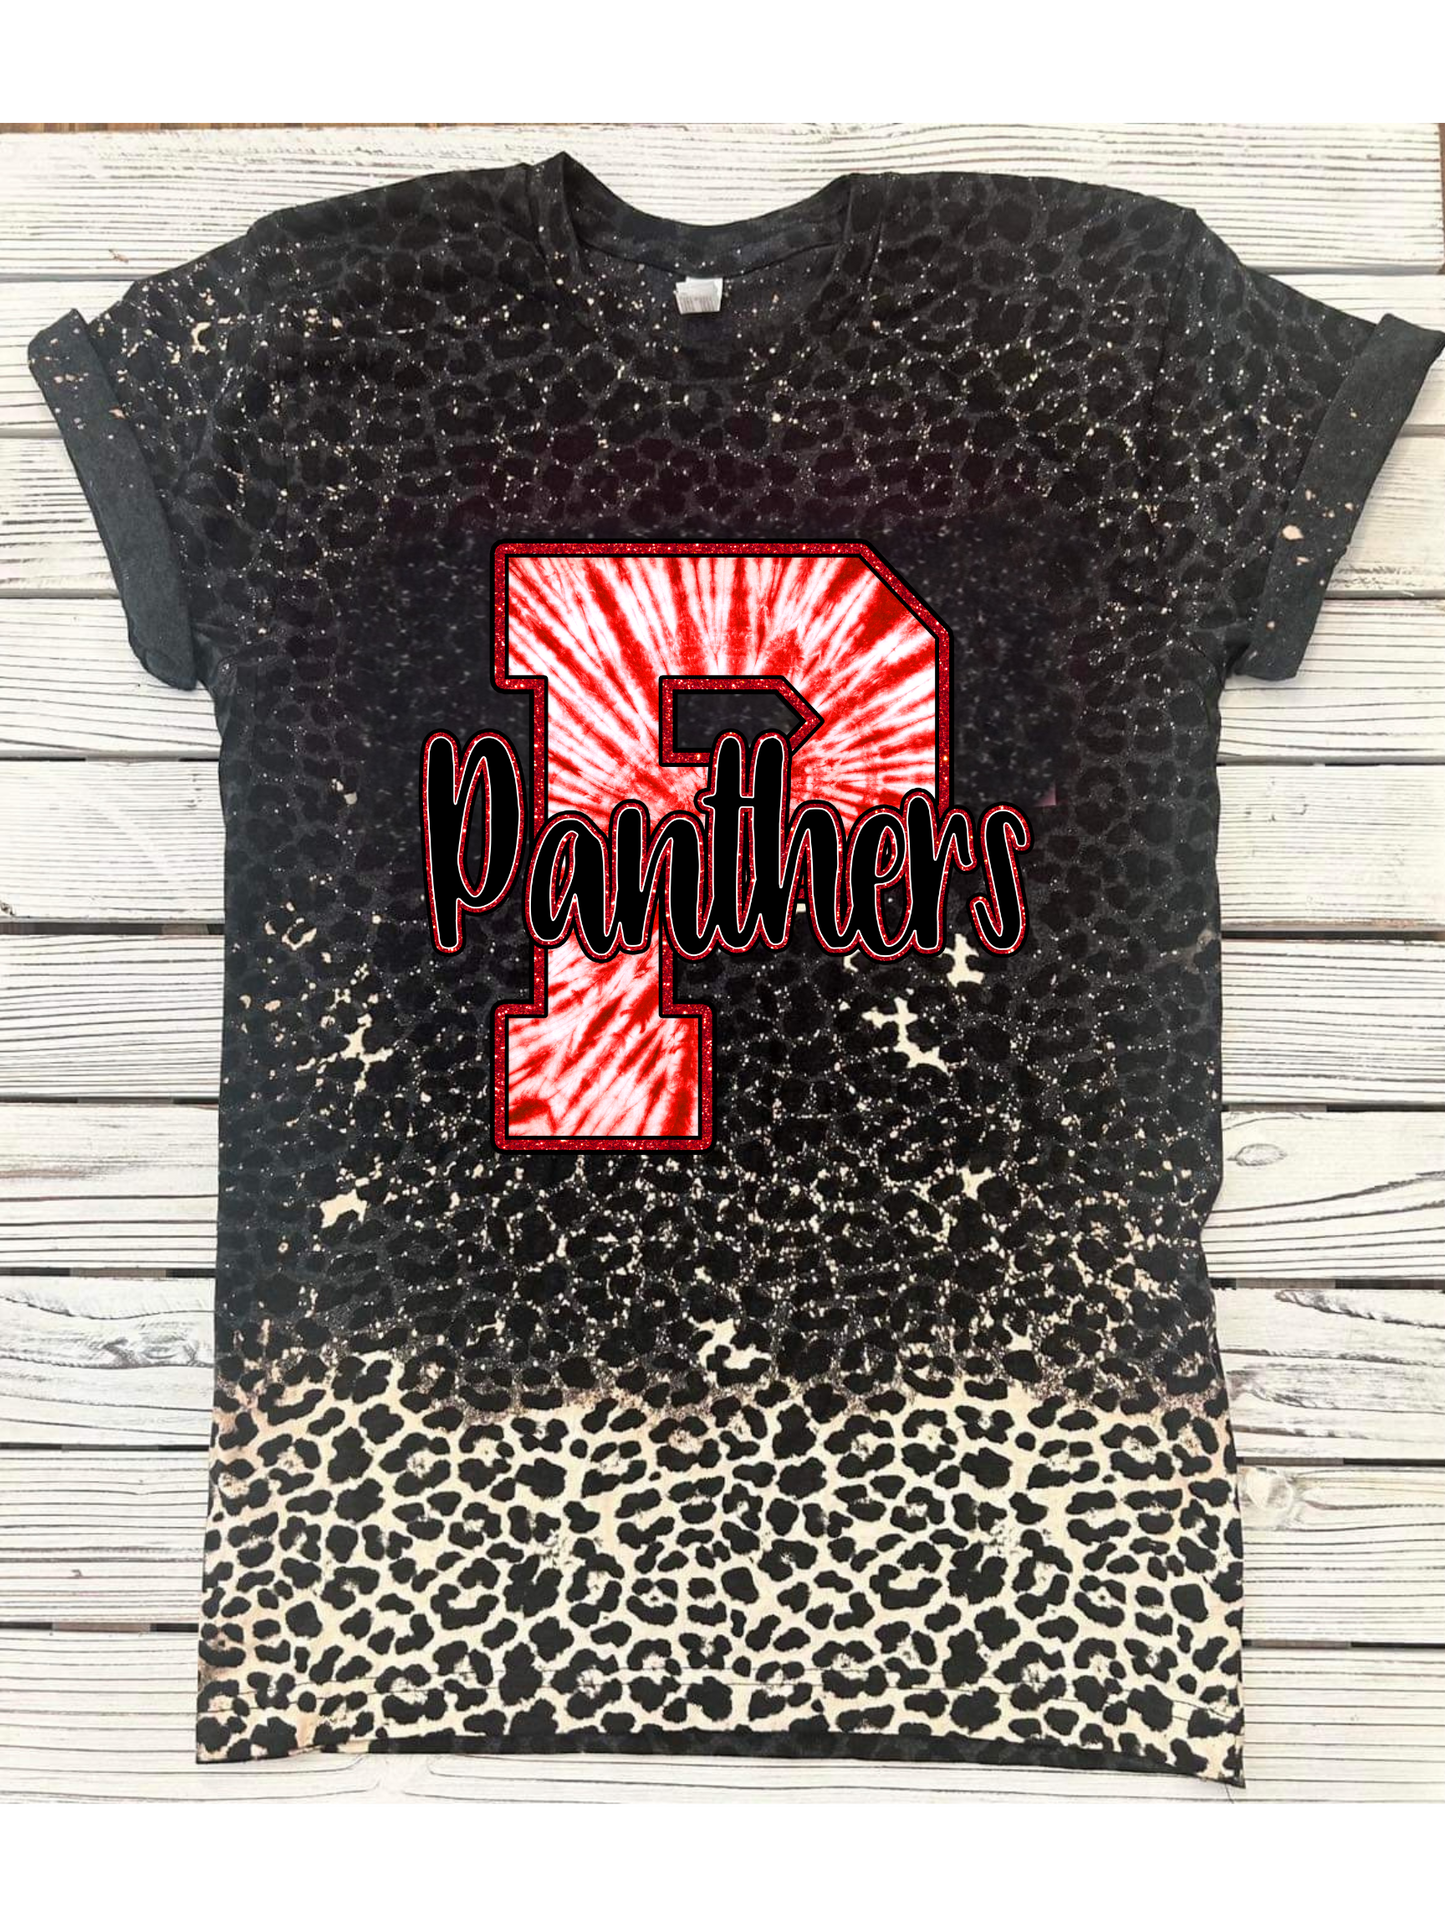 Bleached Leopard School tee preorder (adult and youth)